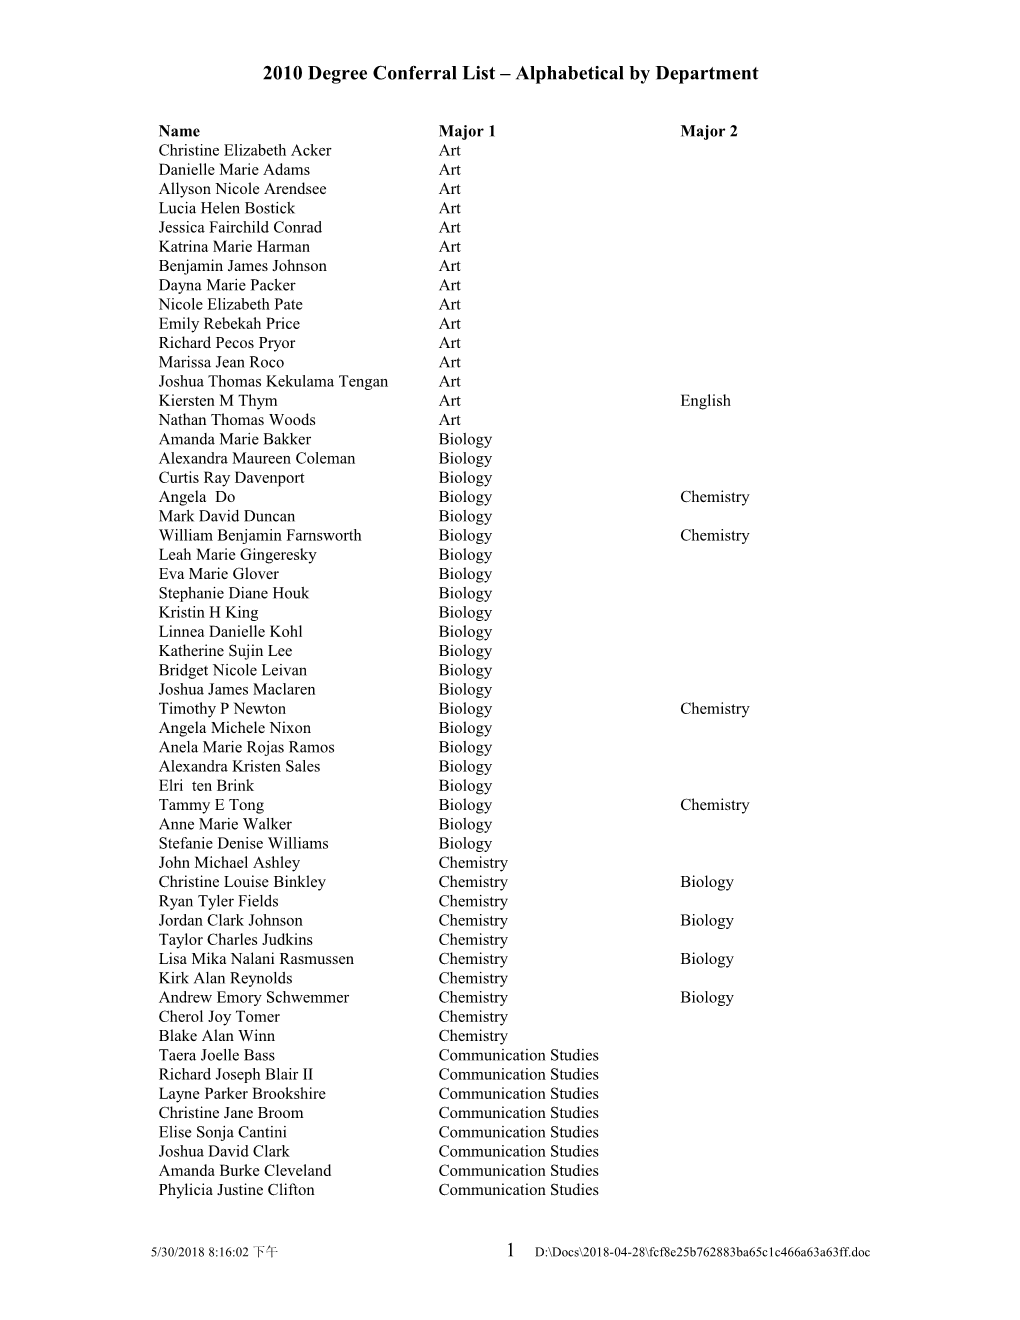 2010 Degree Conferral List Alphabetical by Department